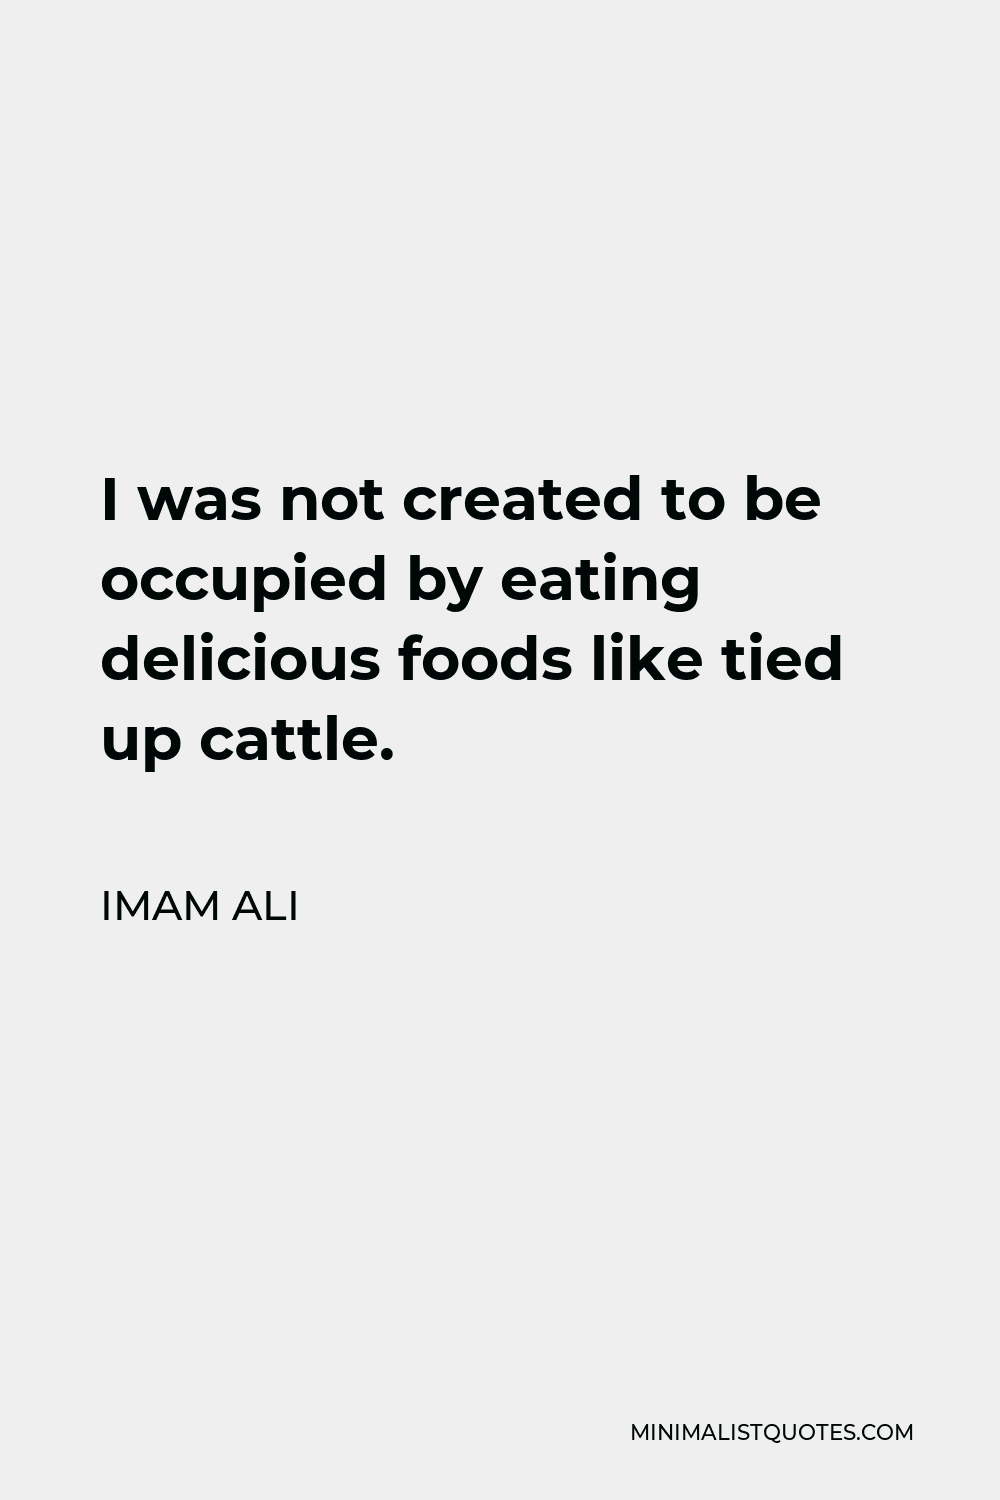 Imam Ali Quote - I was not created to be occupied by eating delicious foods like tied up cattle.